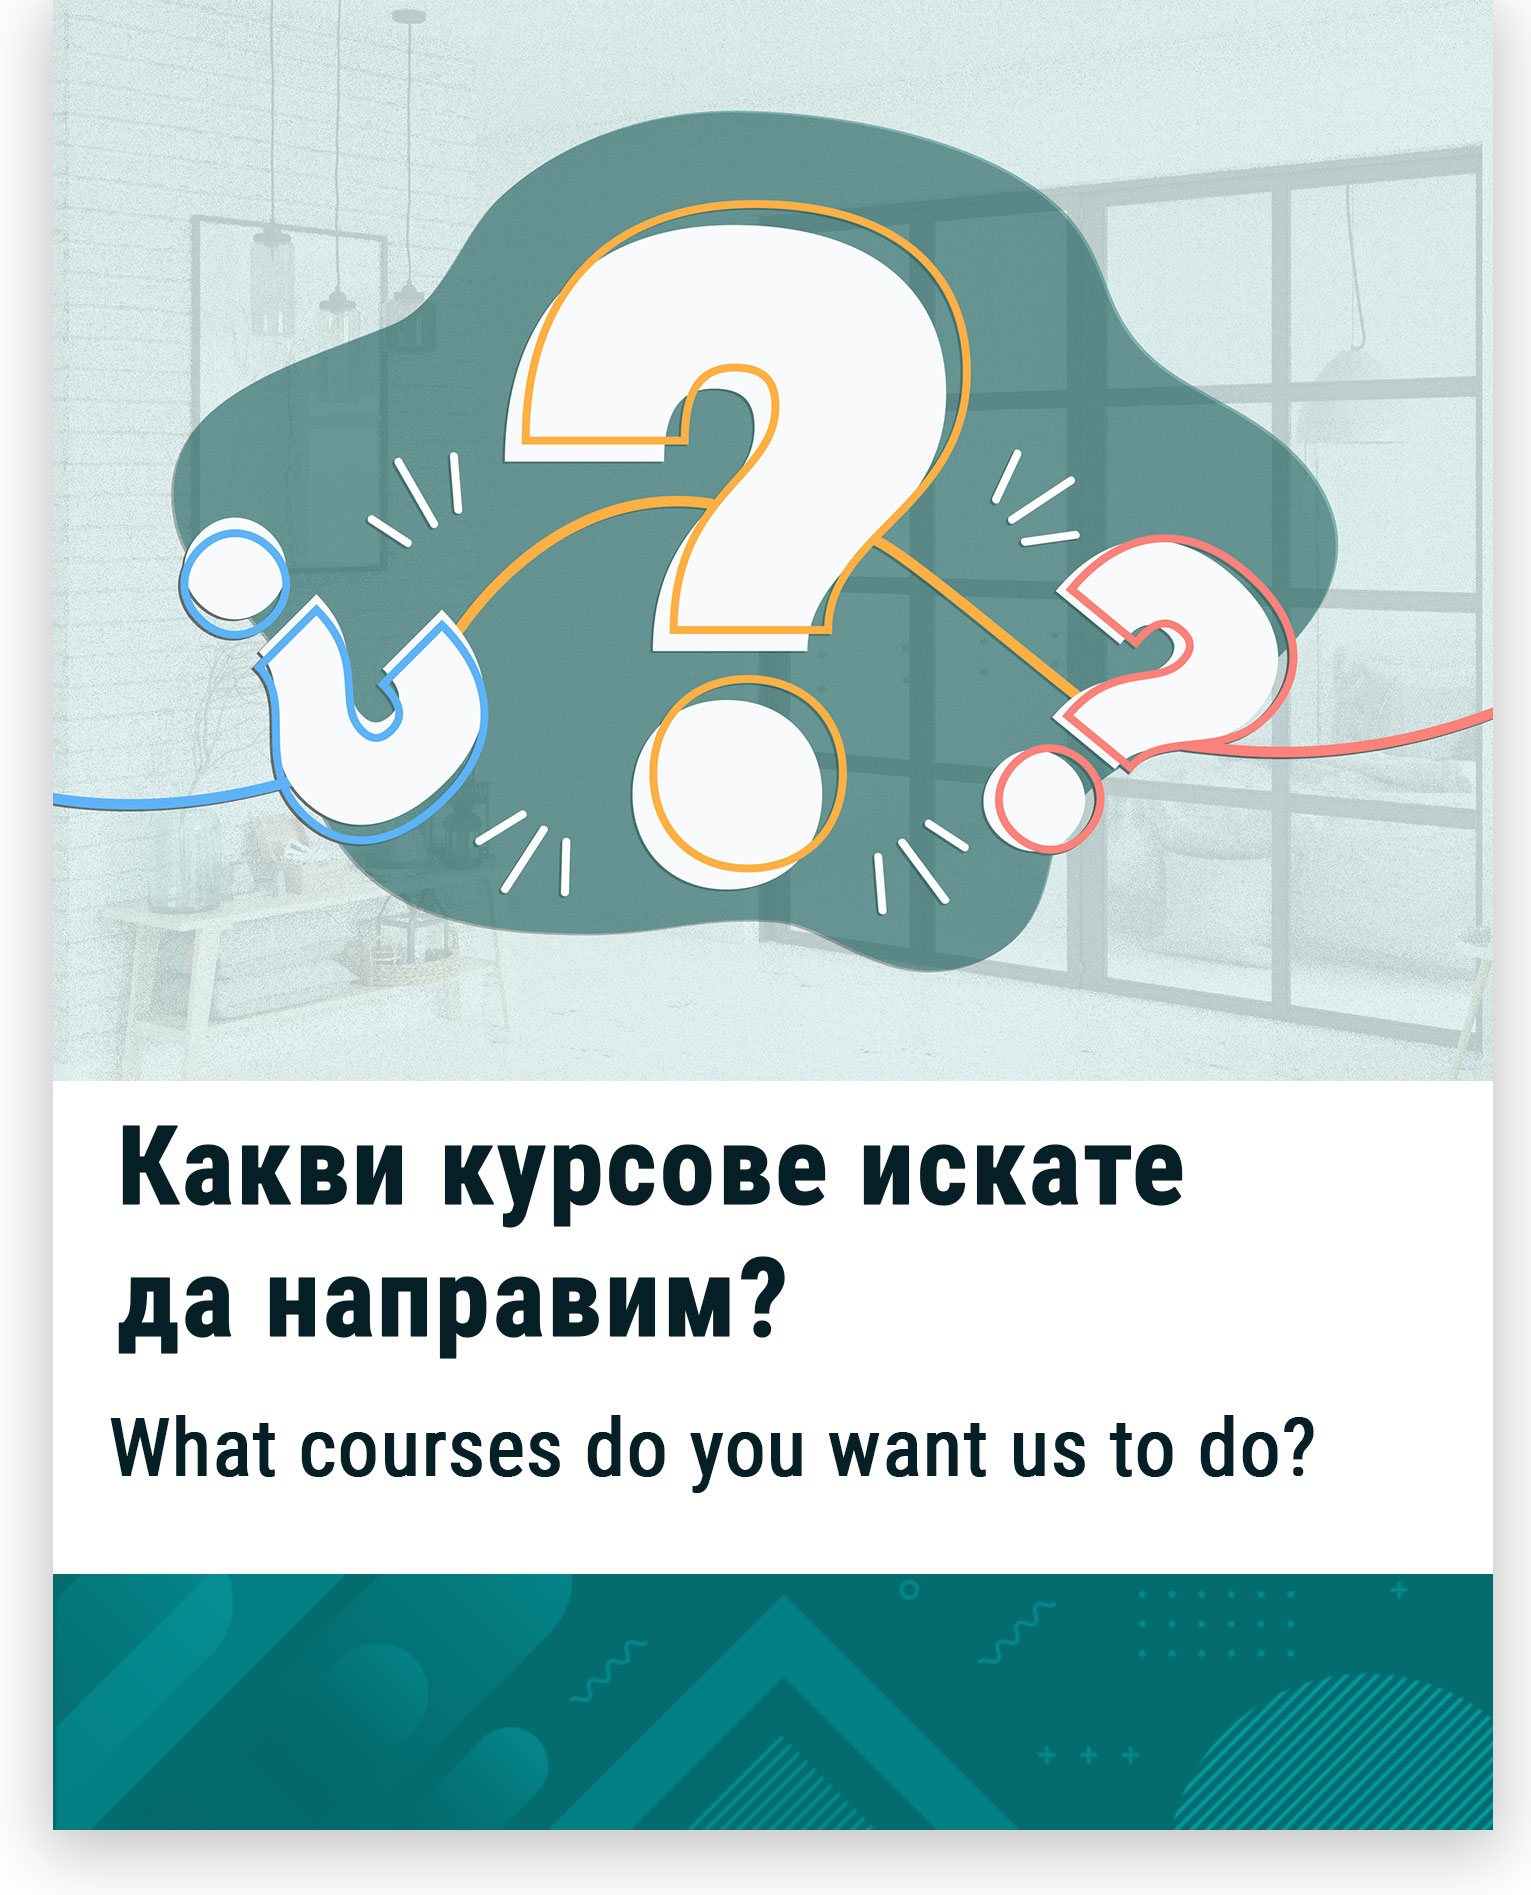 Какви курсове искате да направим?/ What courses do you want us to do?